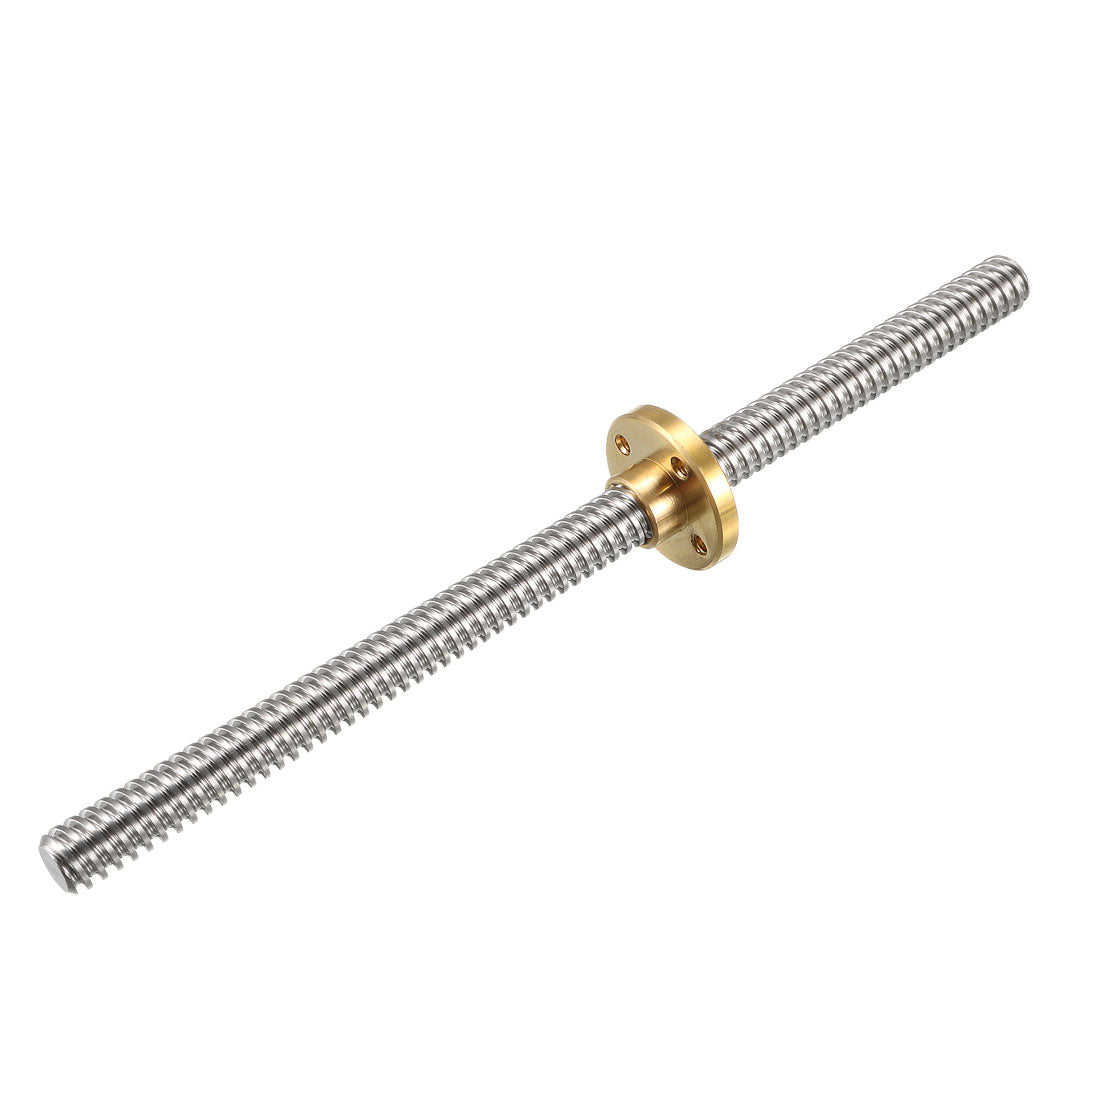 uxcell Uxcell 150mm T8 Pitch 2mm Lead 2mm Lead Screw Rod with Copper Nut for 3D Printer